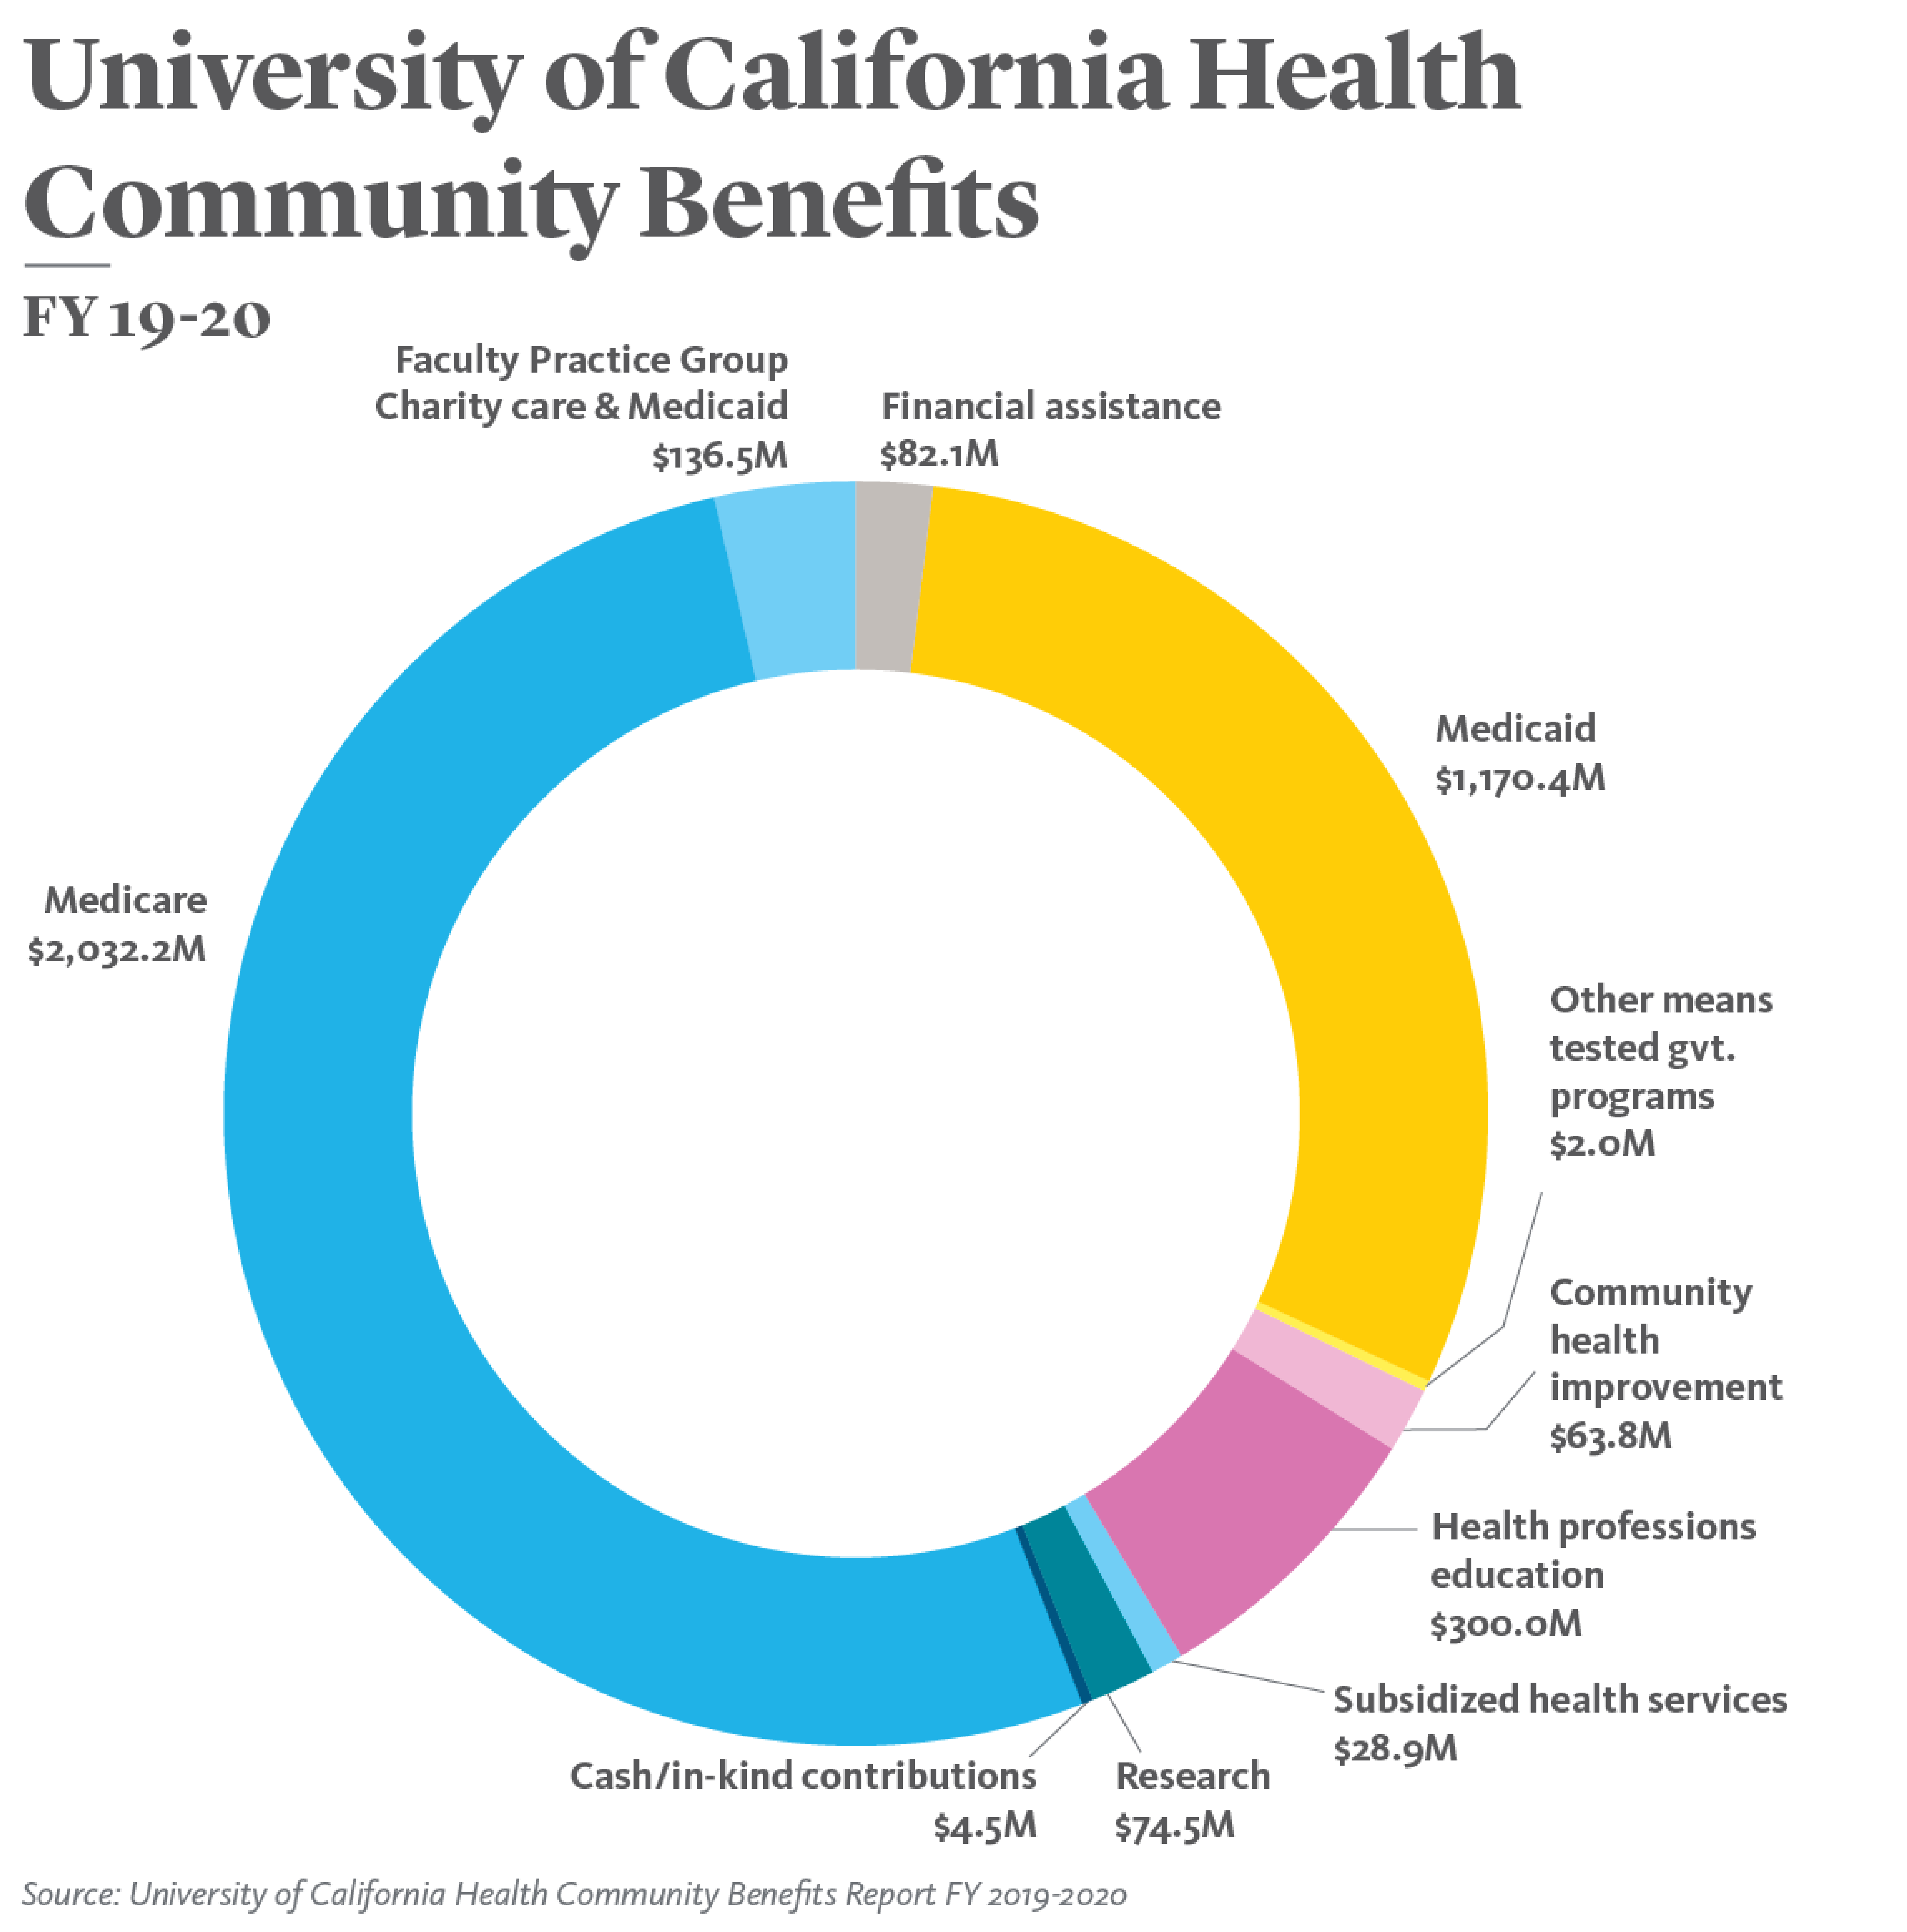 Donut chart showing categories of the $3.9 billion in community benefits delivered by University of California Health in FY 2019-2020